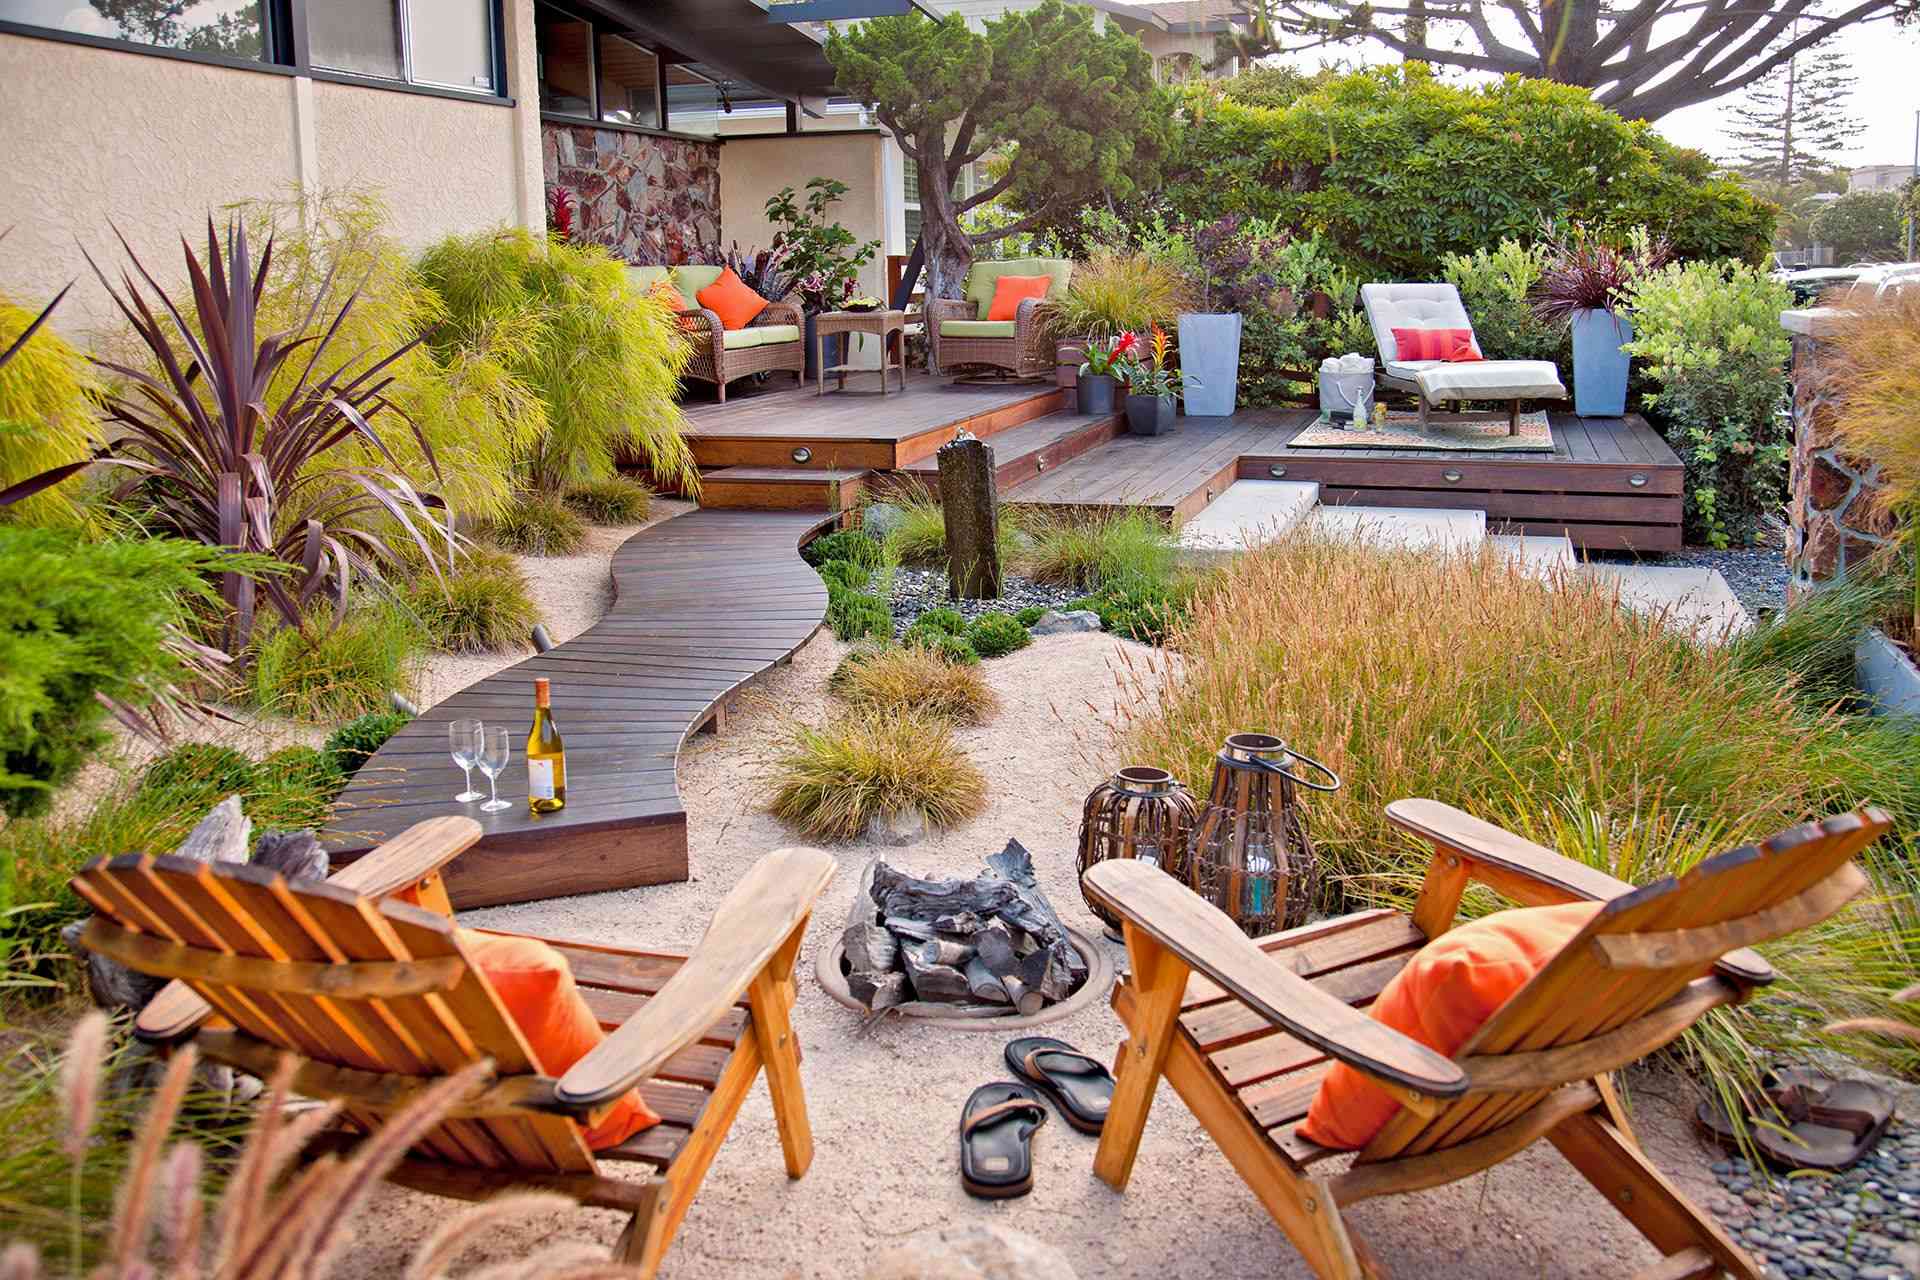 How To Landscape Small Backyard